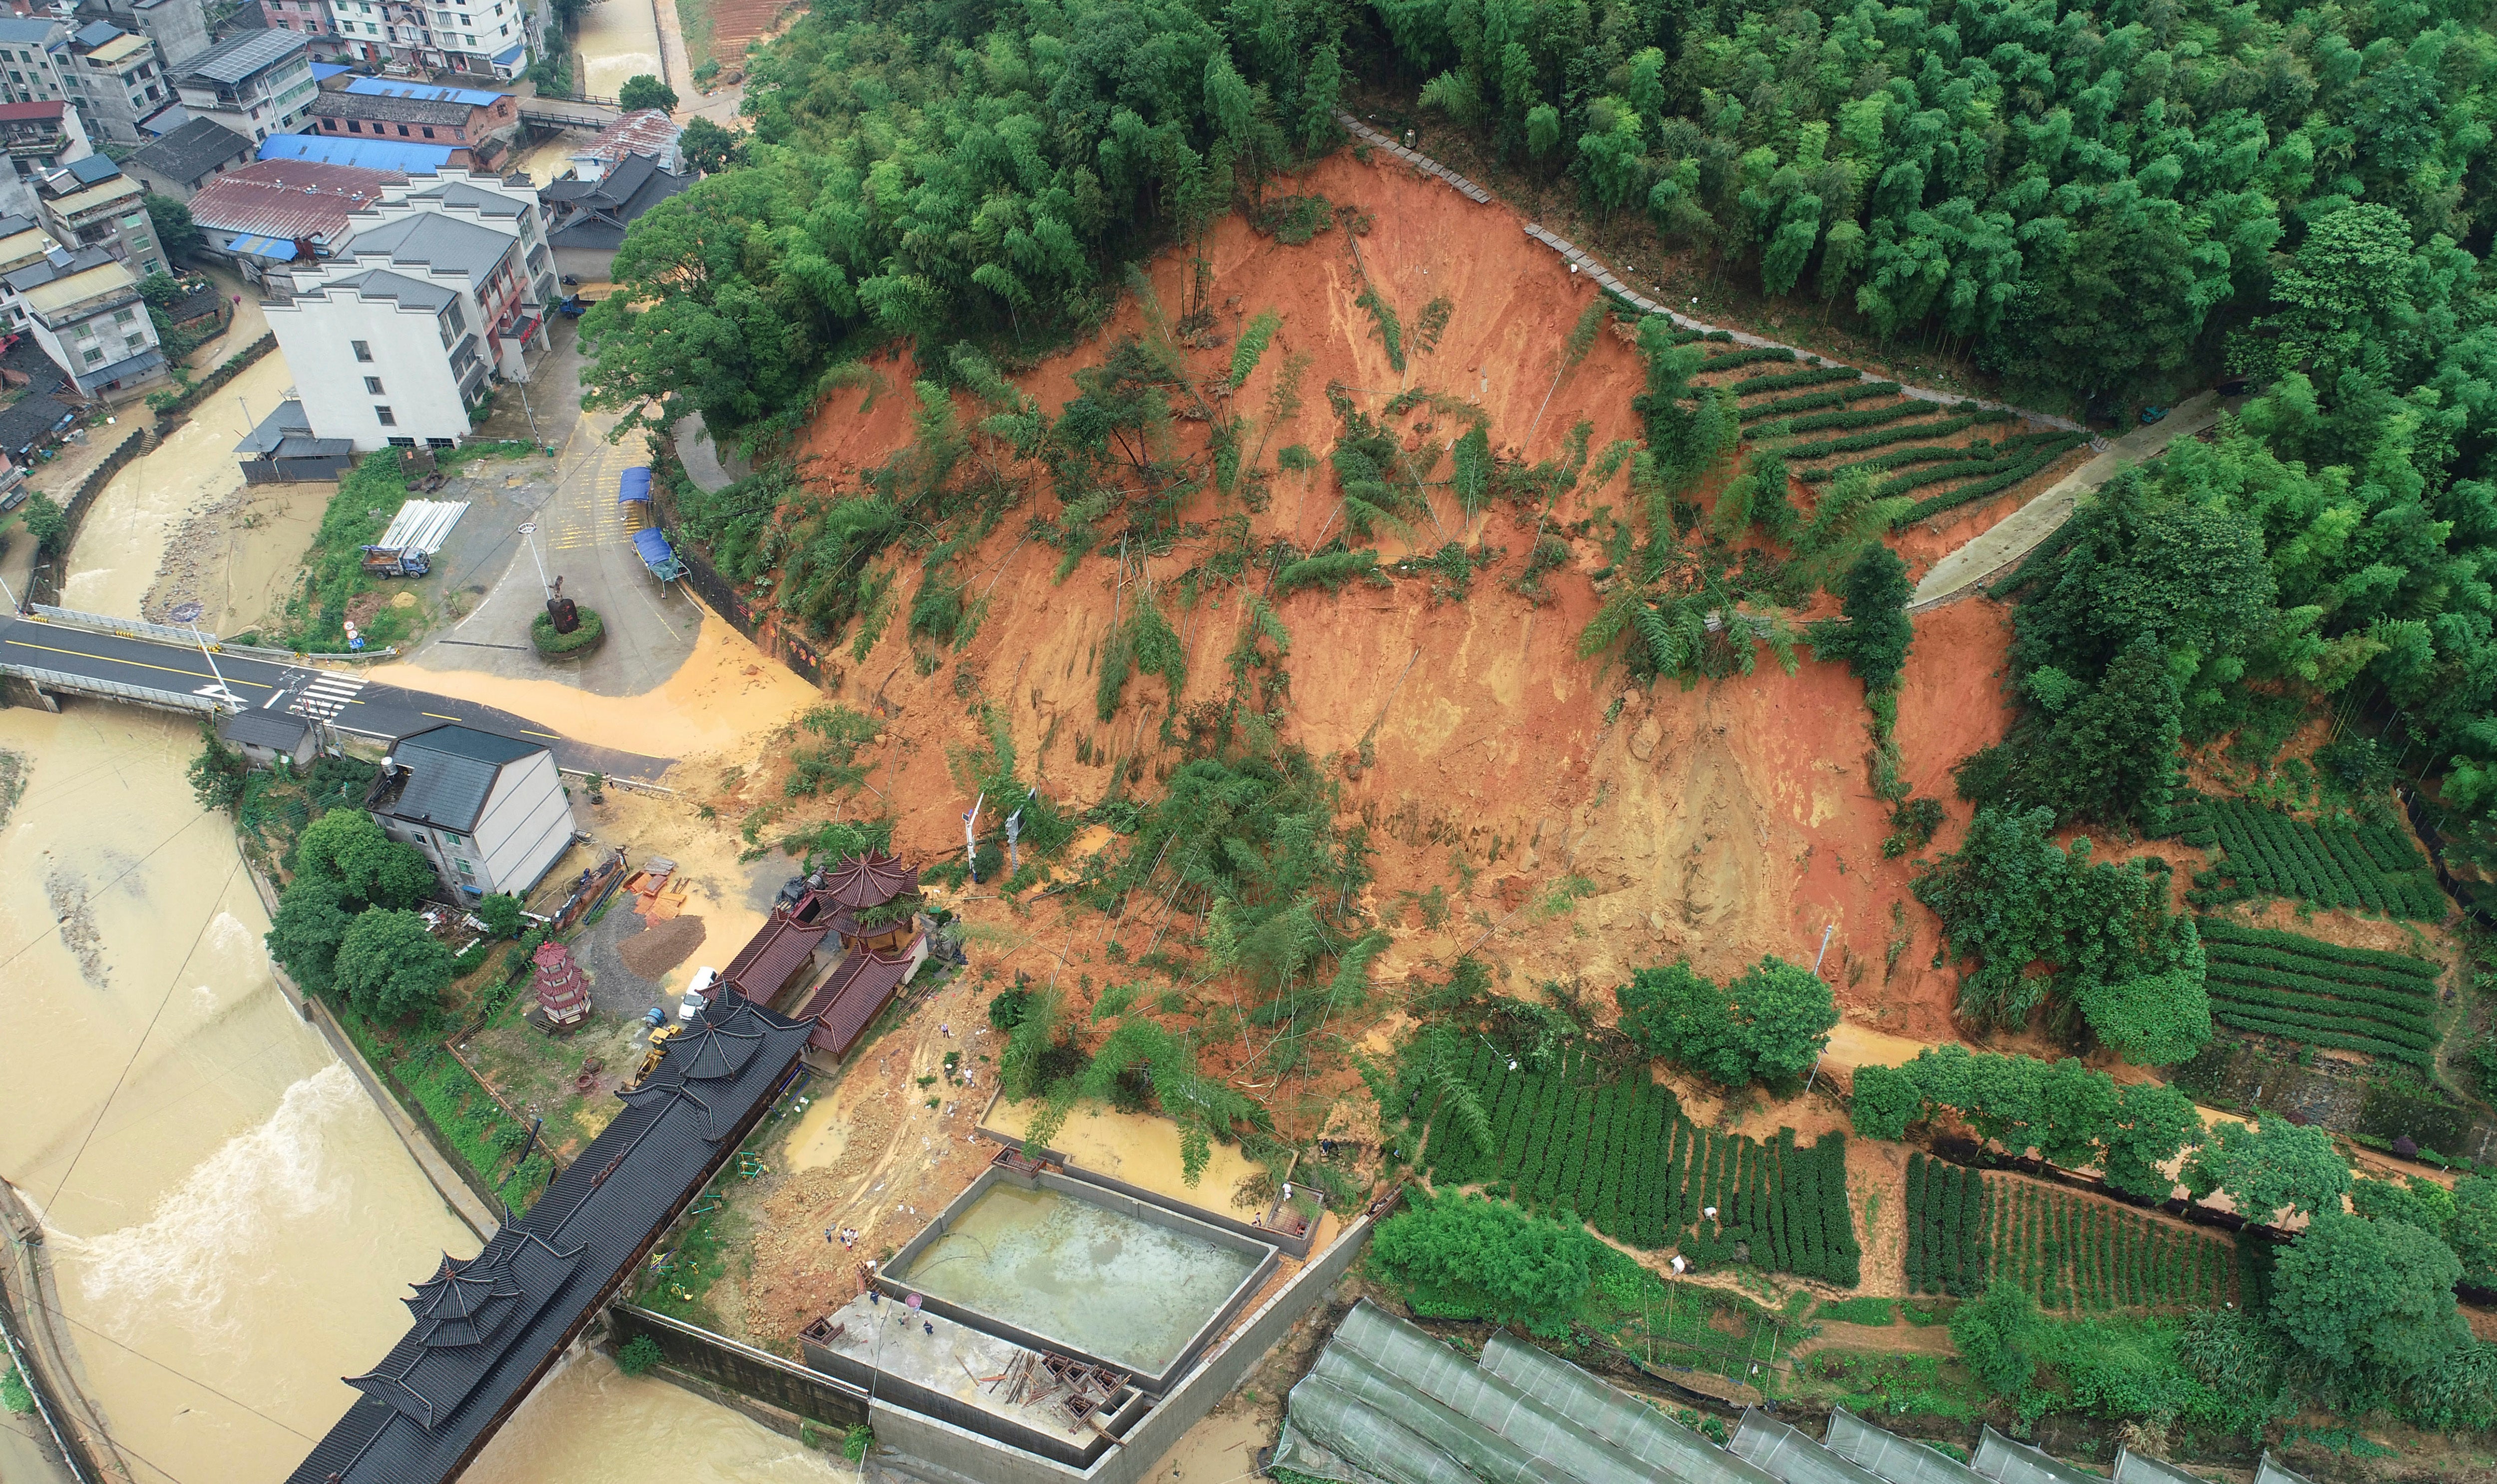 Aerial drone image shows landslide in an area affected by torrential rains in Tieshan Township of Zhenghe County